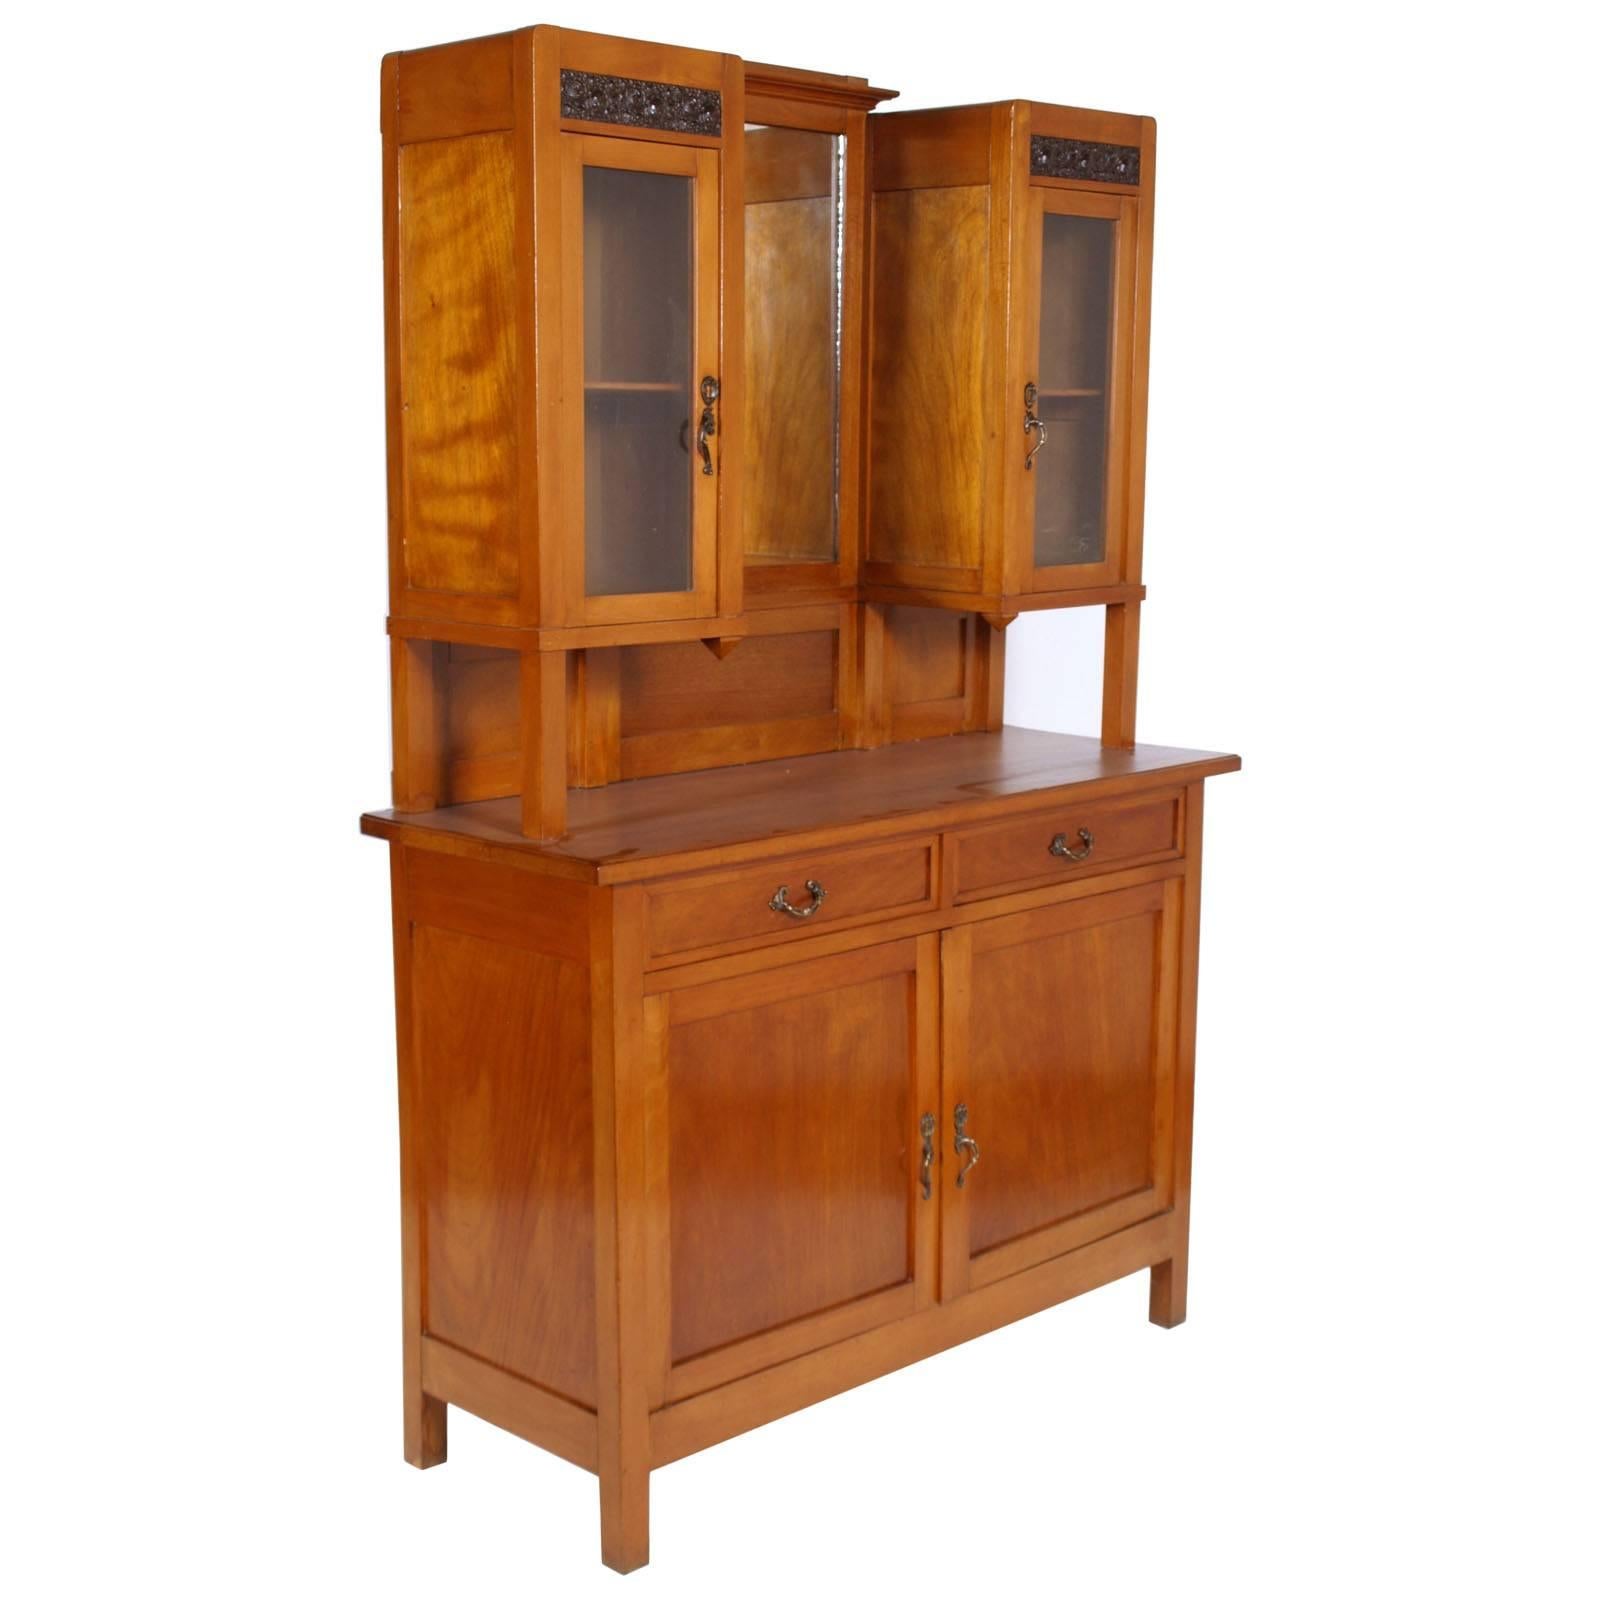 Late 19th Century  Art Nouveau Credenza Display Cabinet, by Bassano's Ebanistery